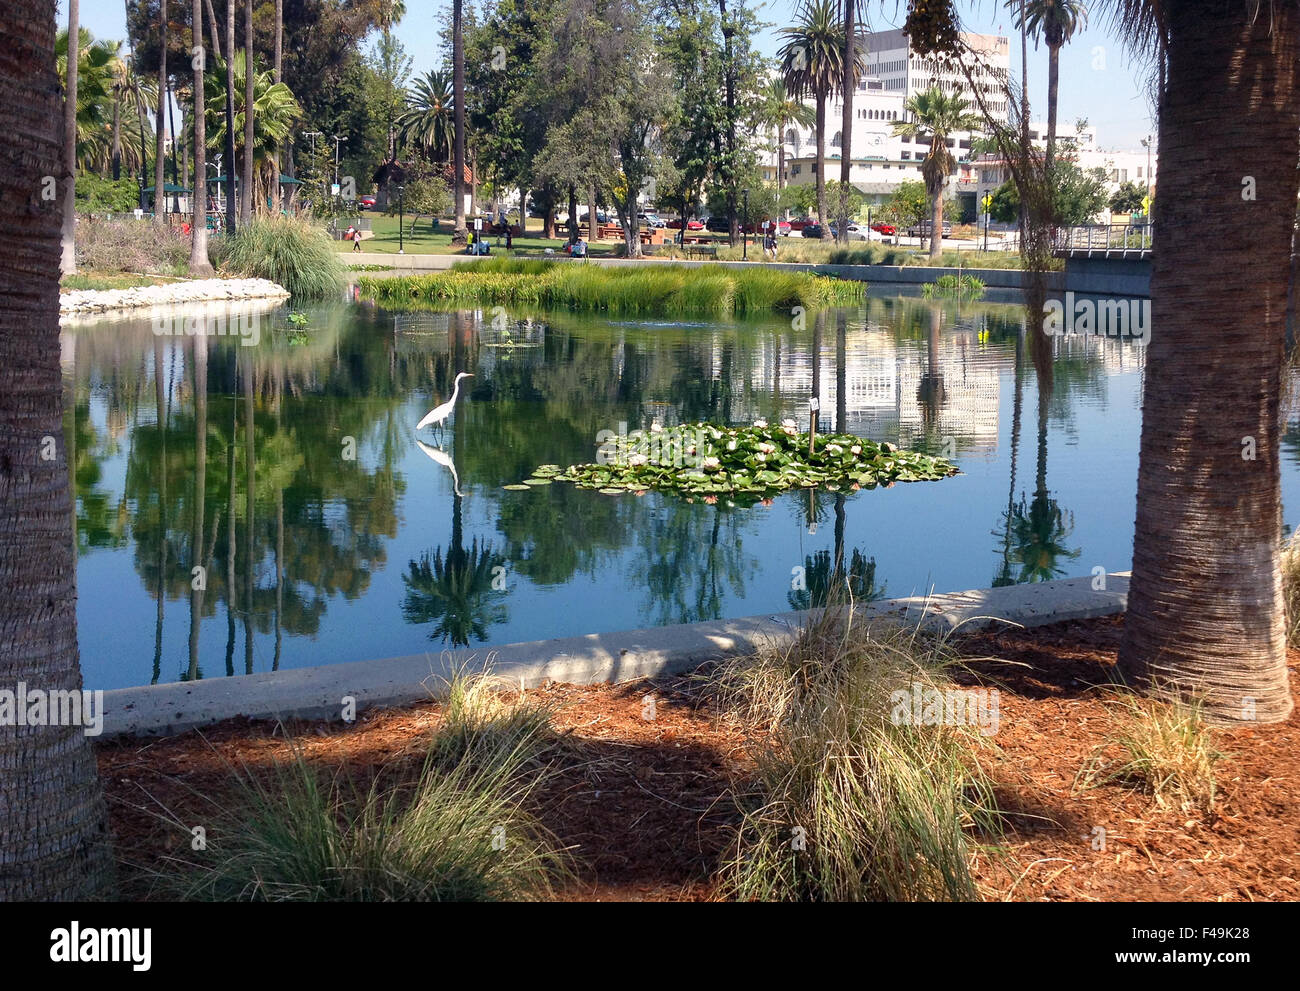 Egret, lotus plants, and downtown view at Echo Park Lake, Echo Park, CA, spring 2015. Stock Photo